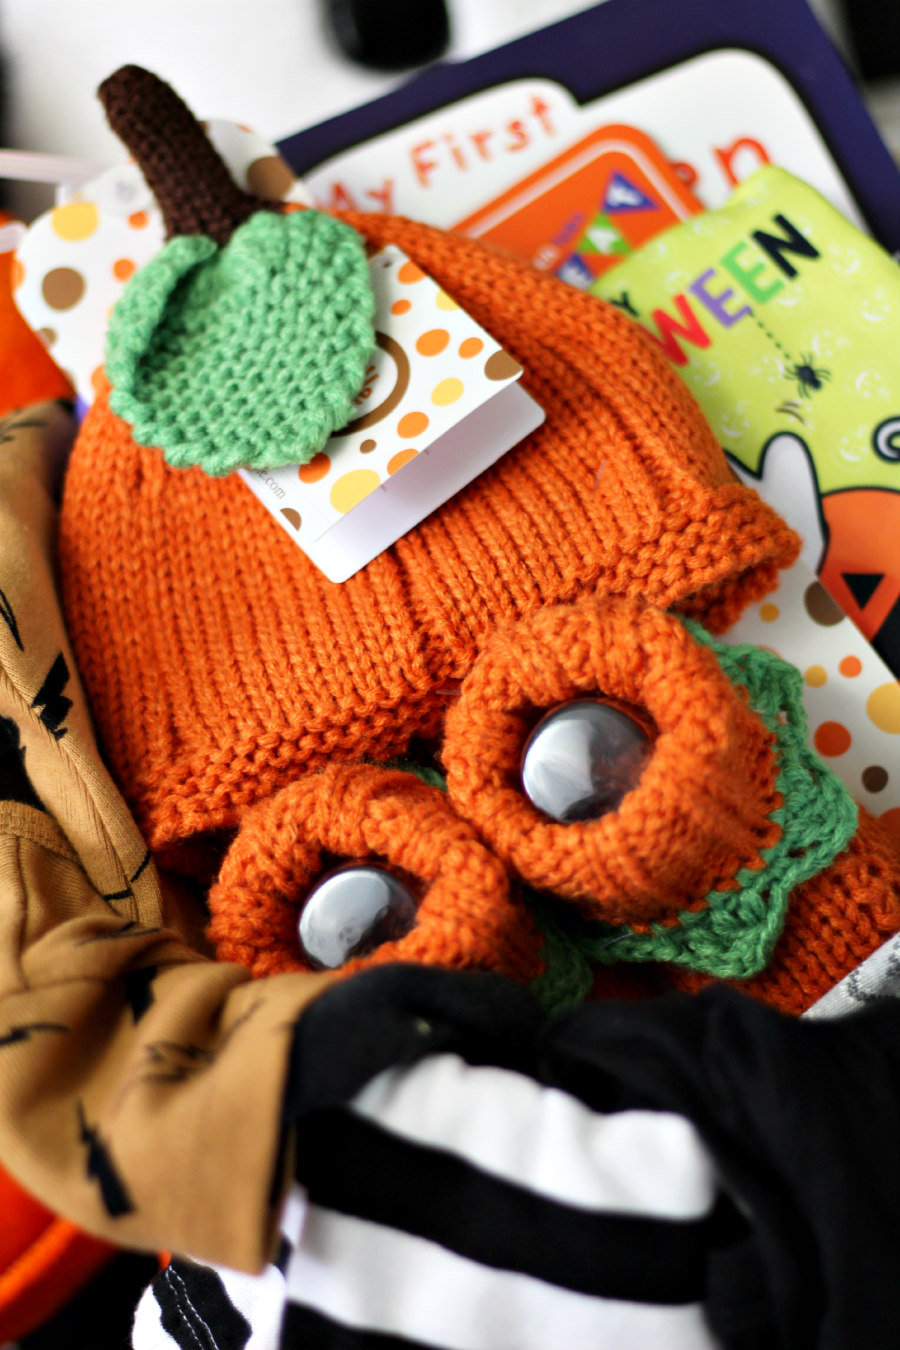 Close up photo of Baby's First Halloween gift basket including knit pumpkin hat and booties, books, and clothes.